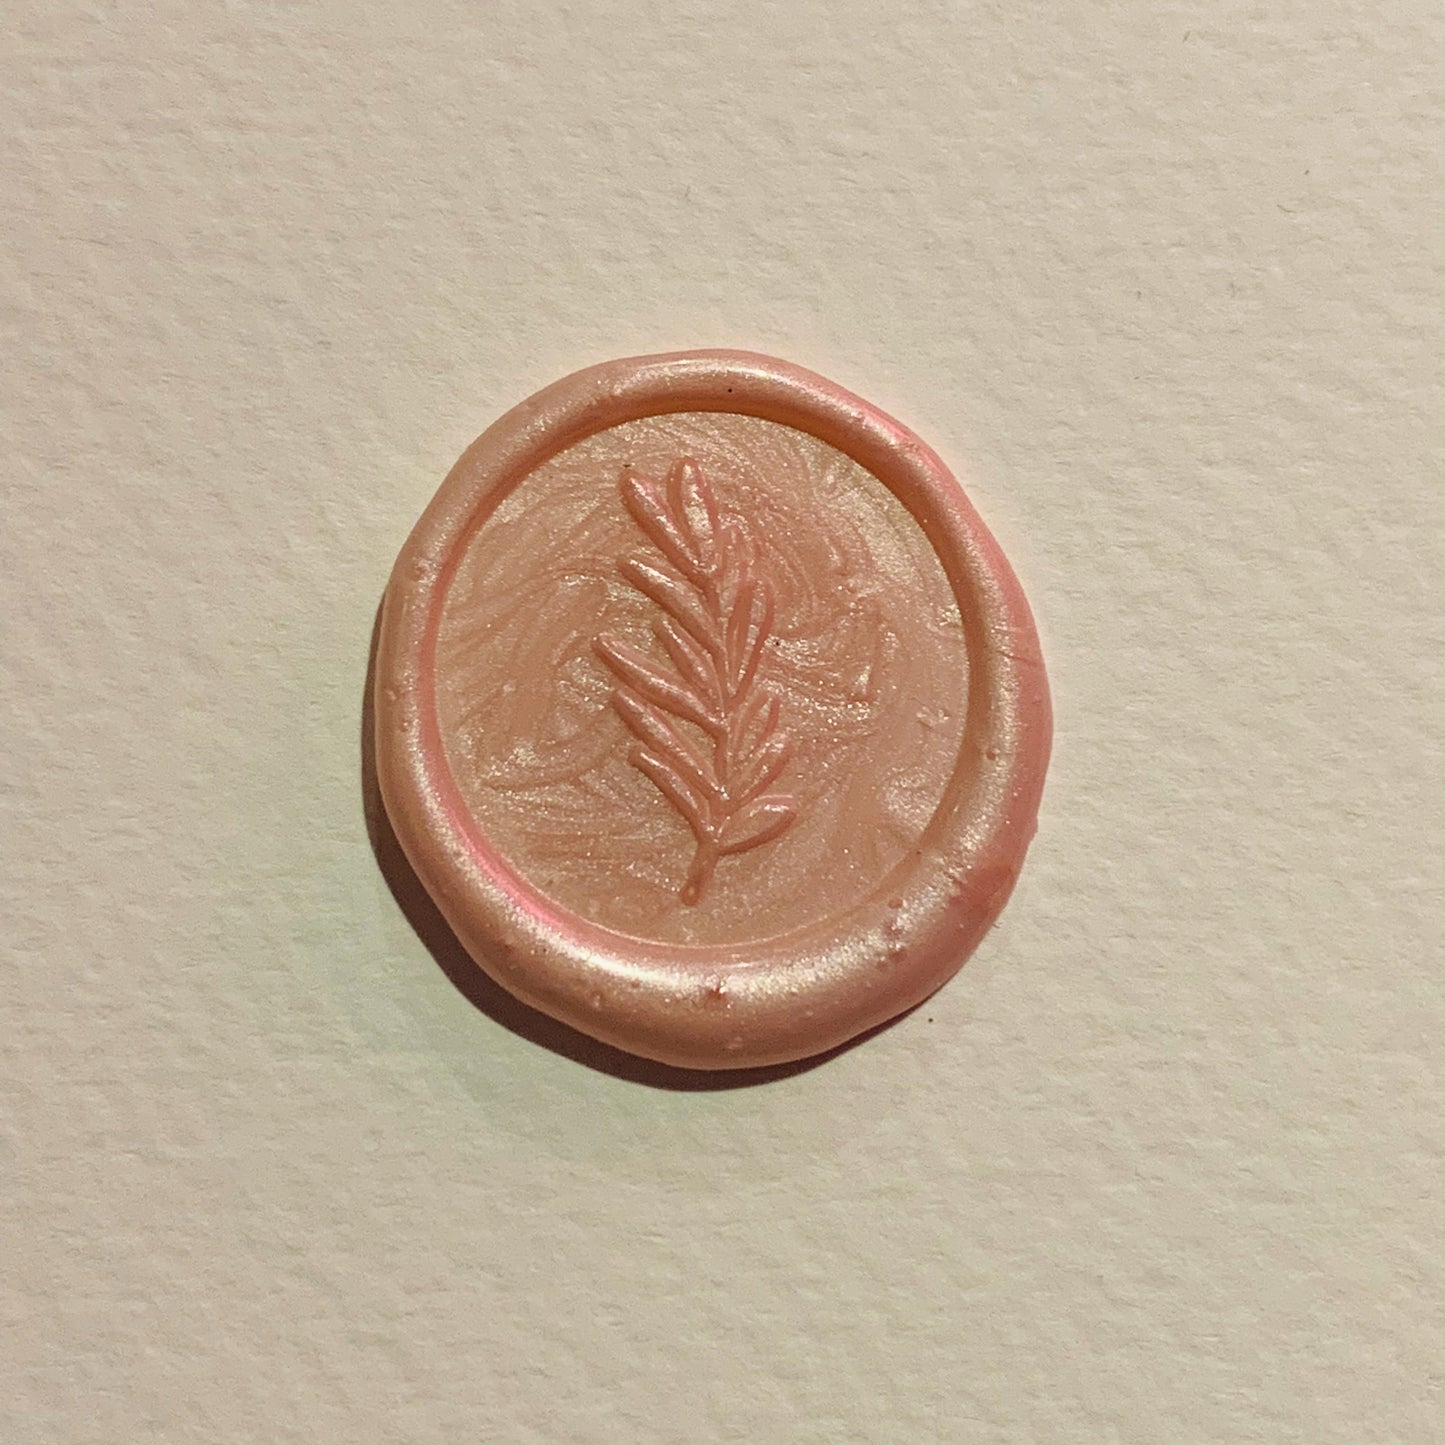 pale pink, pearly wax seal with foliage design